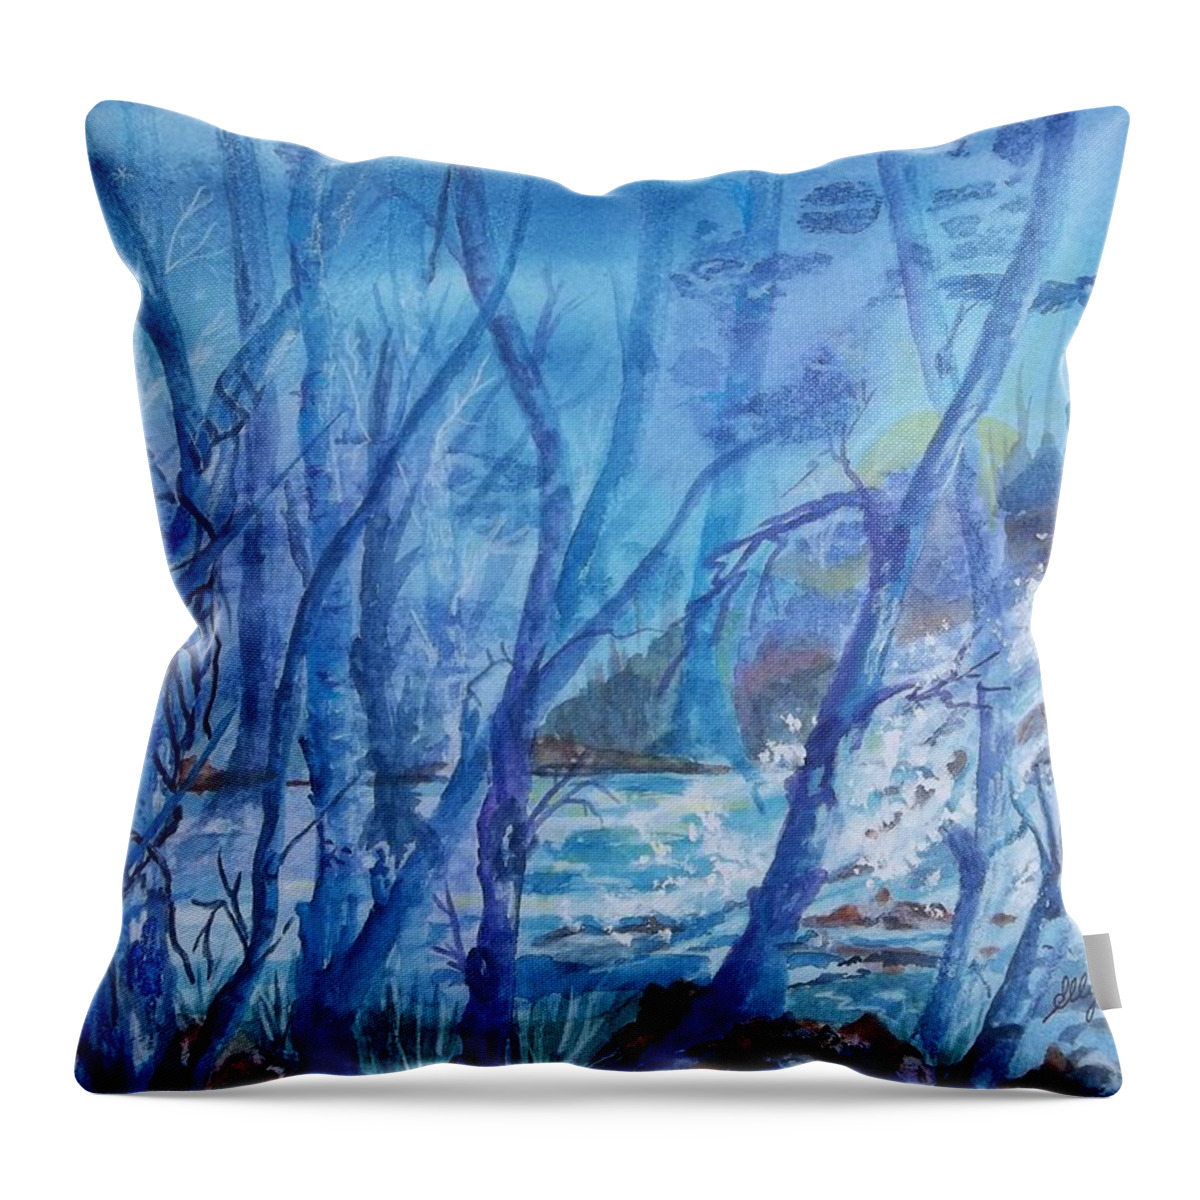 Waterfall Throw Pillow featuring the painting Enchanted Forest by Ellen Levinson